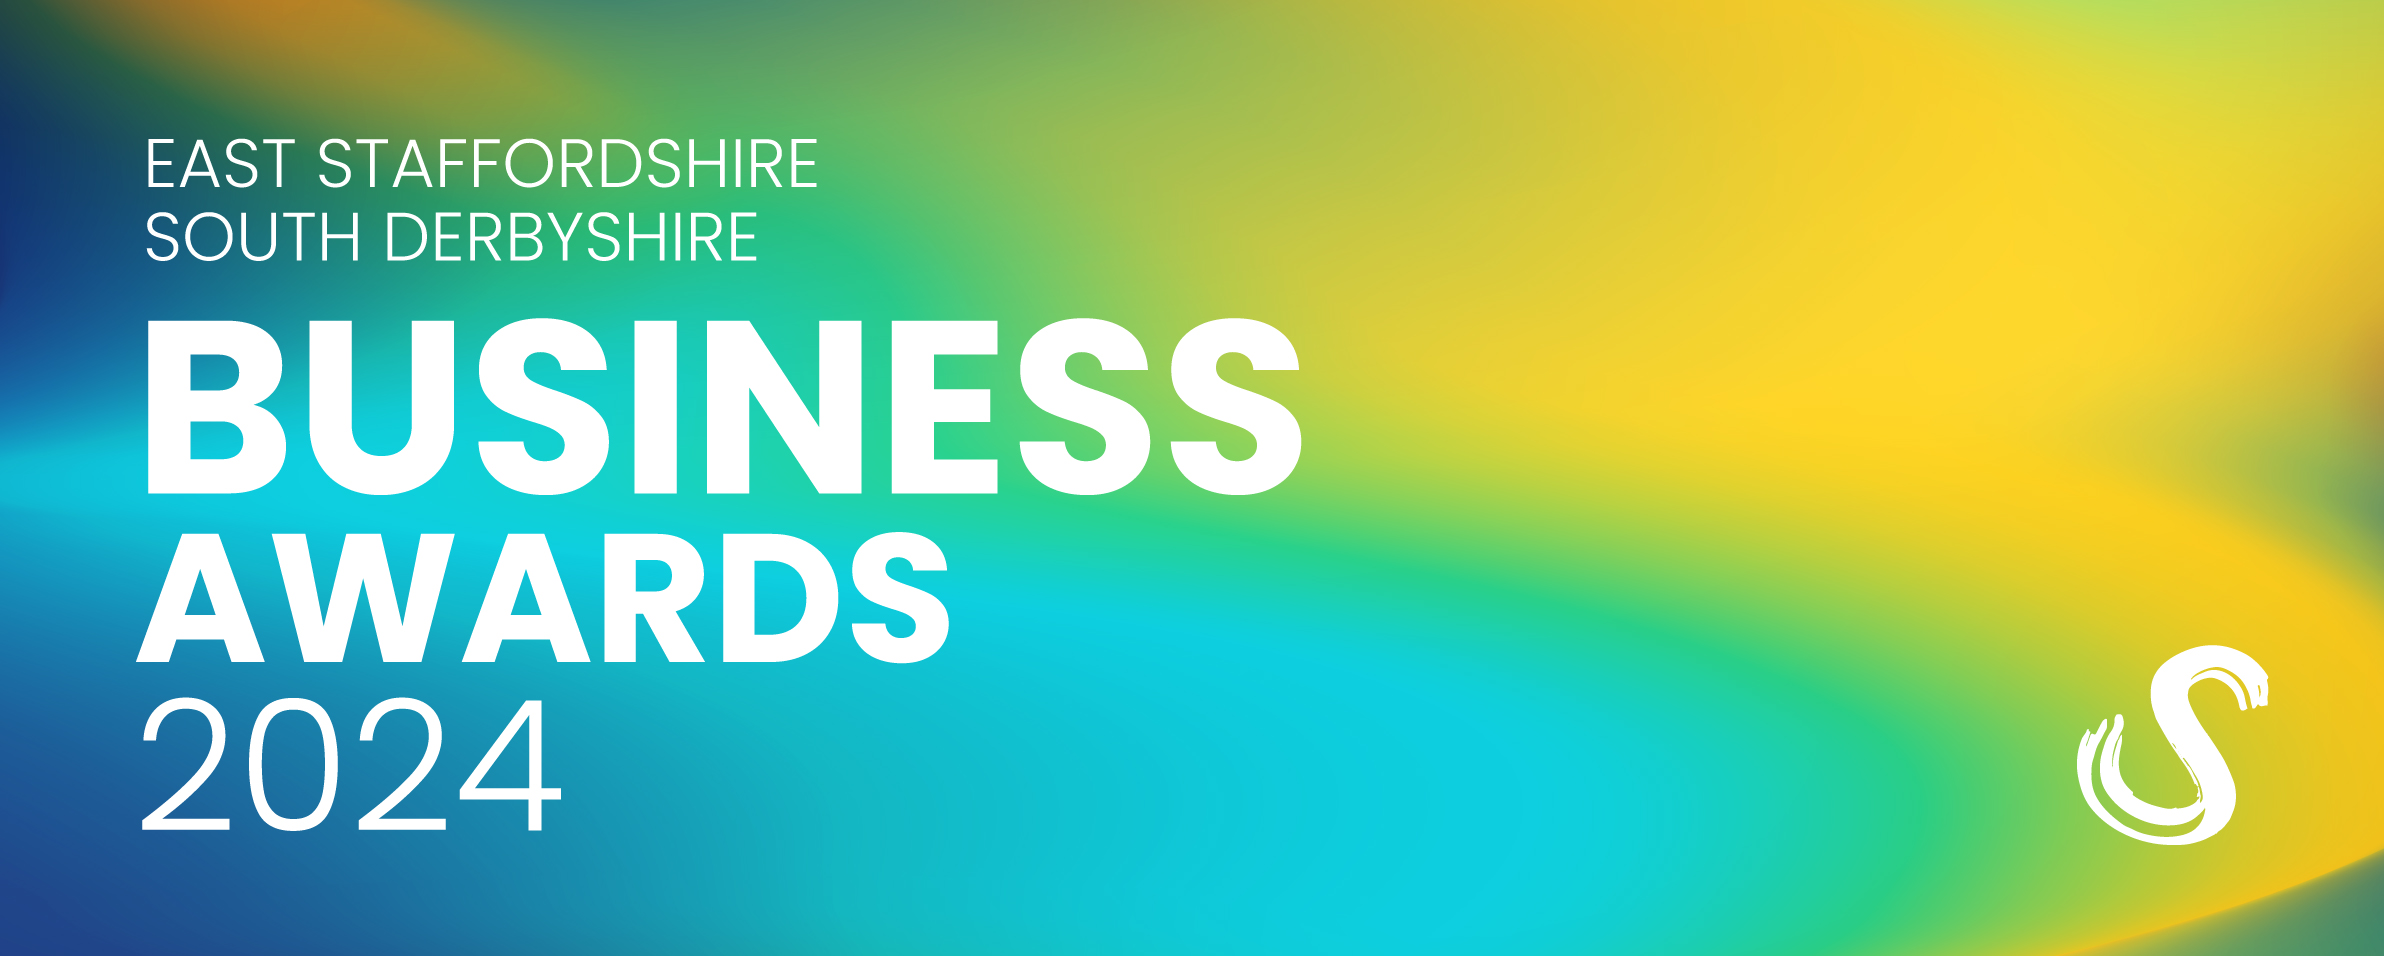 East Staffordshire and South Derbyshire Business Awards 2024 logo flat